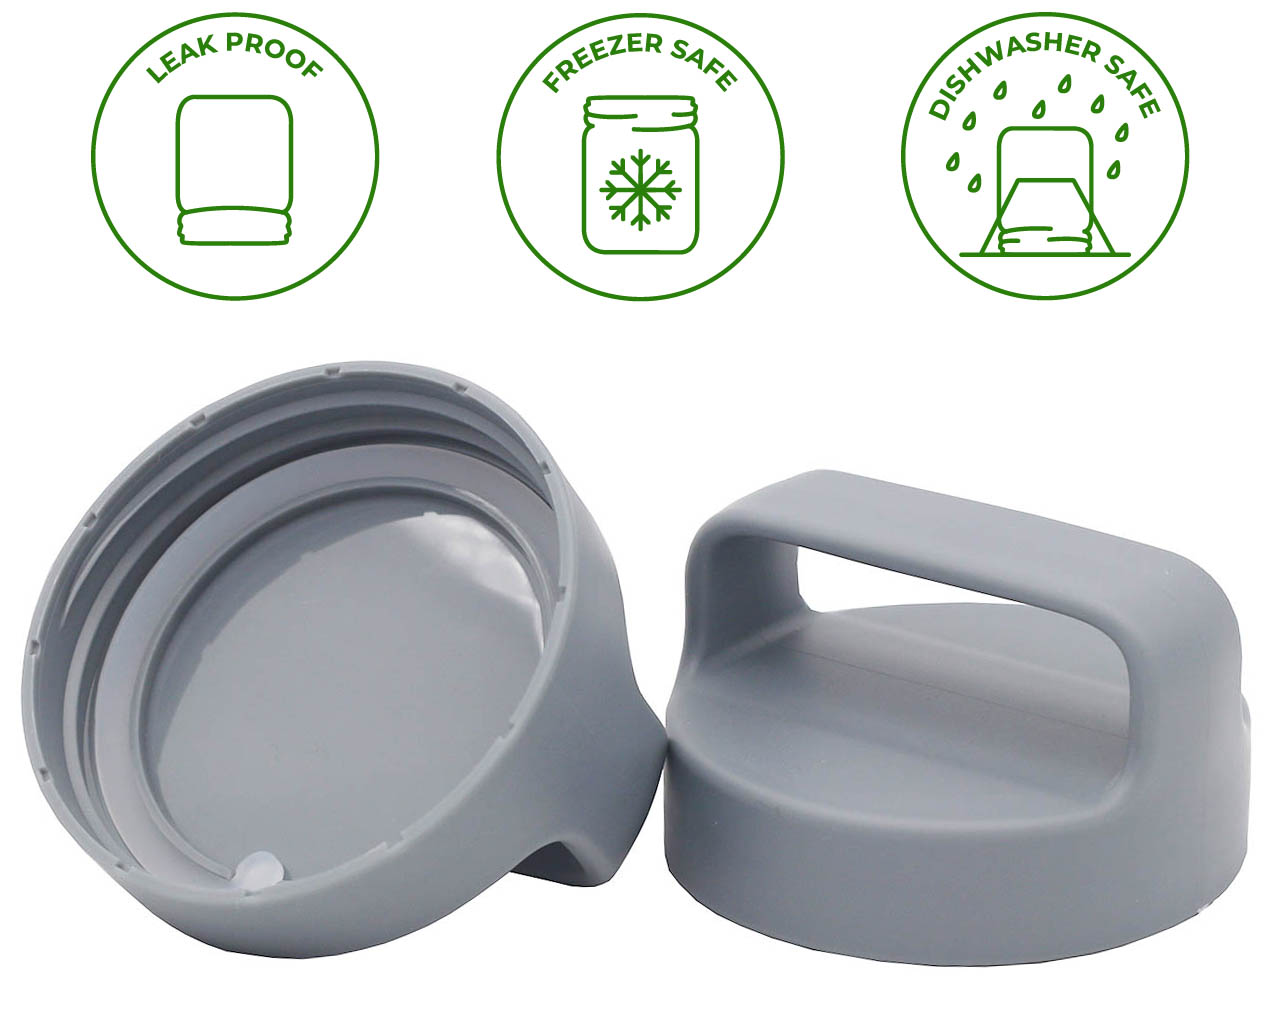 Gray Plastic Handle Canister Lid for Regular Mouth Mason Jars